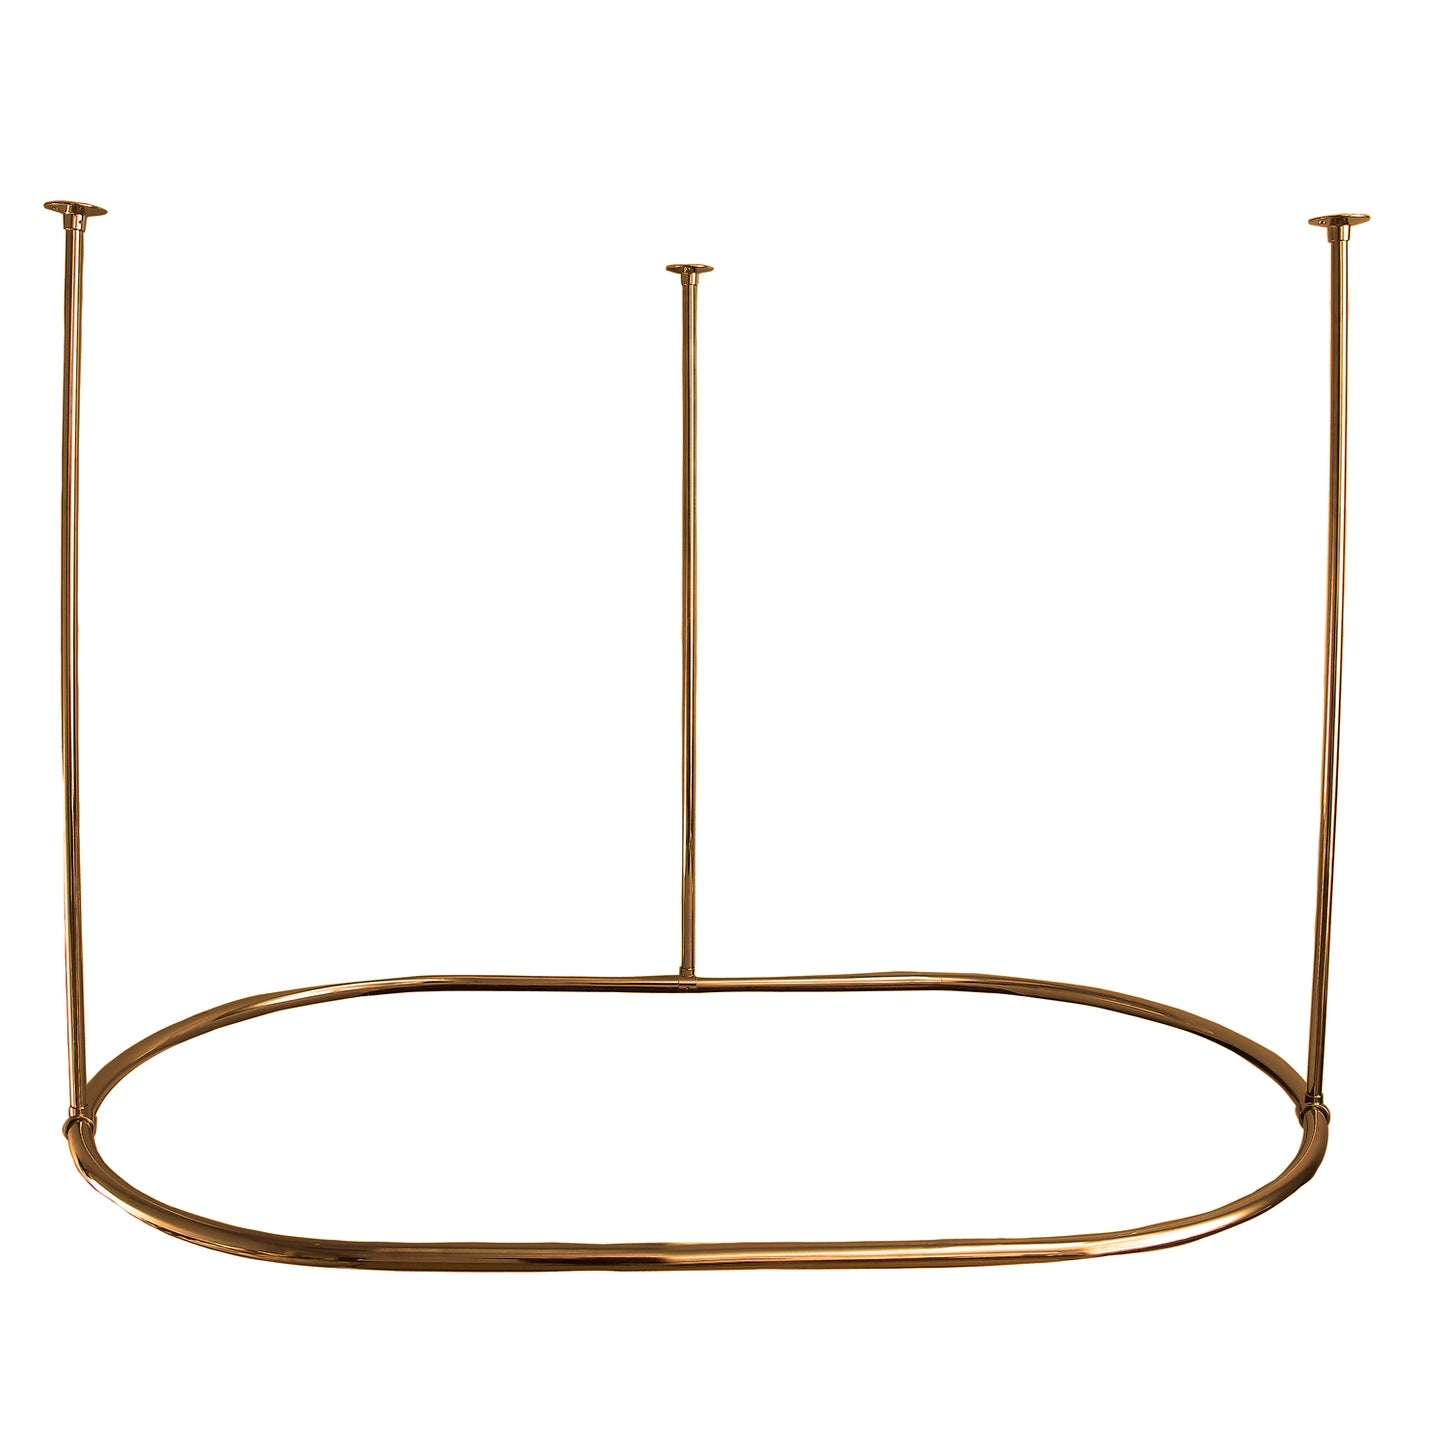 60" x 36" Oval Shower Curtain Ring in Polished Brass